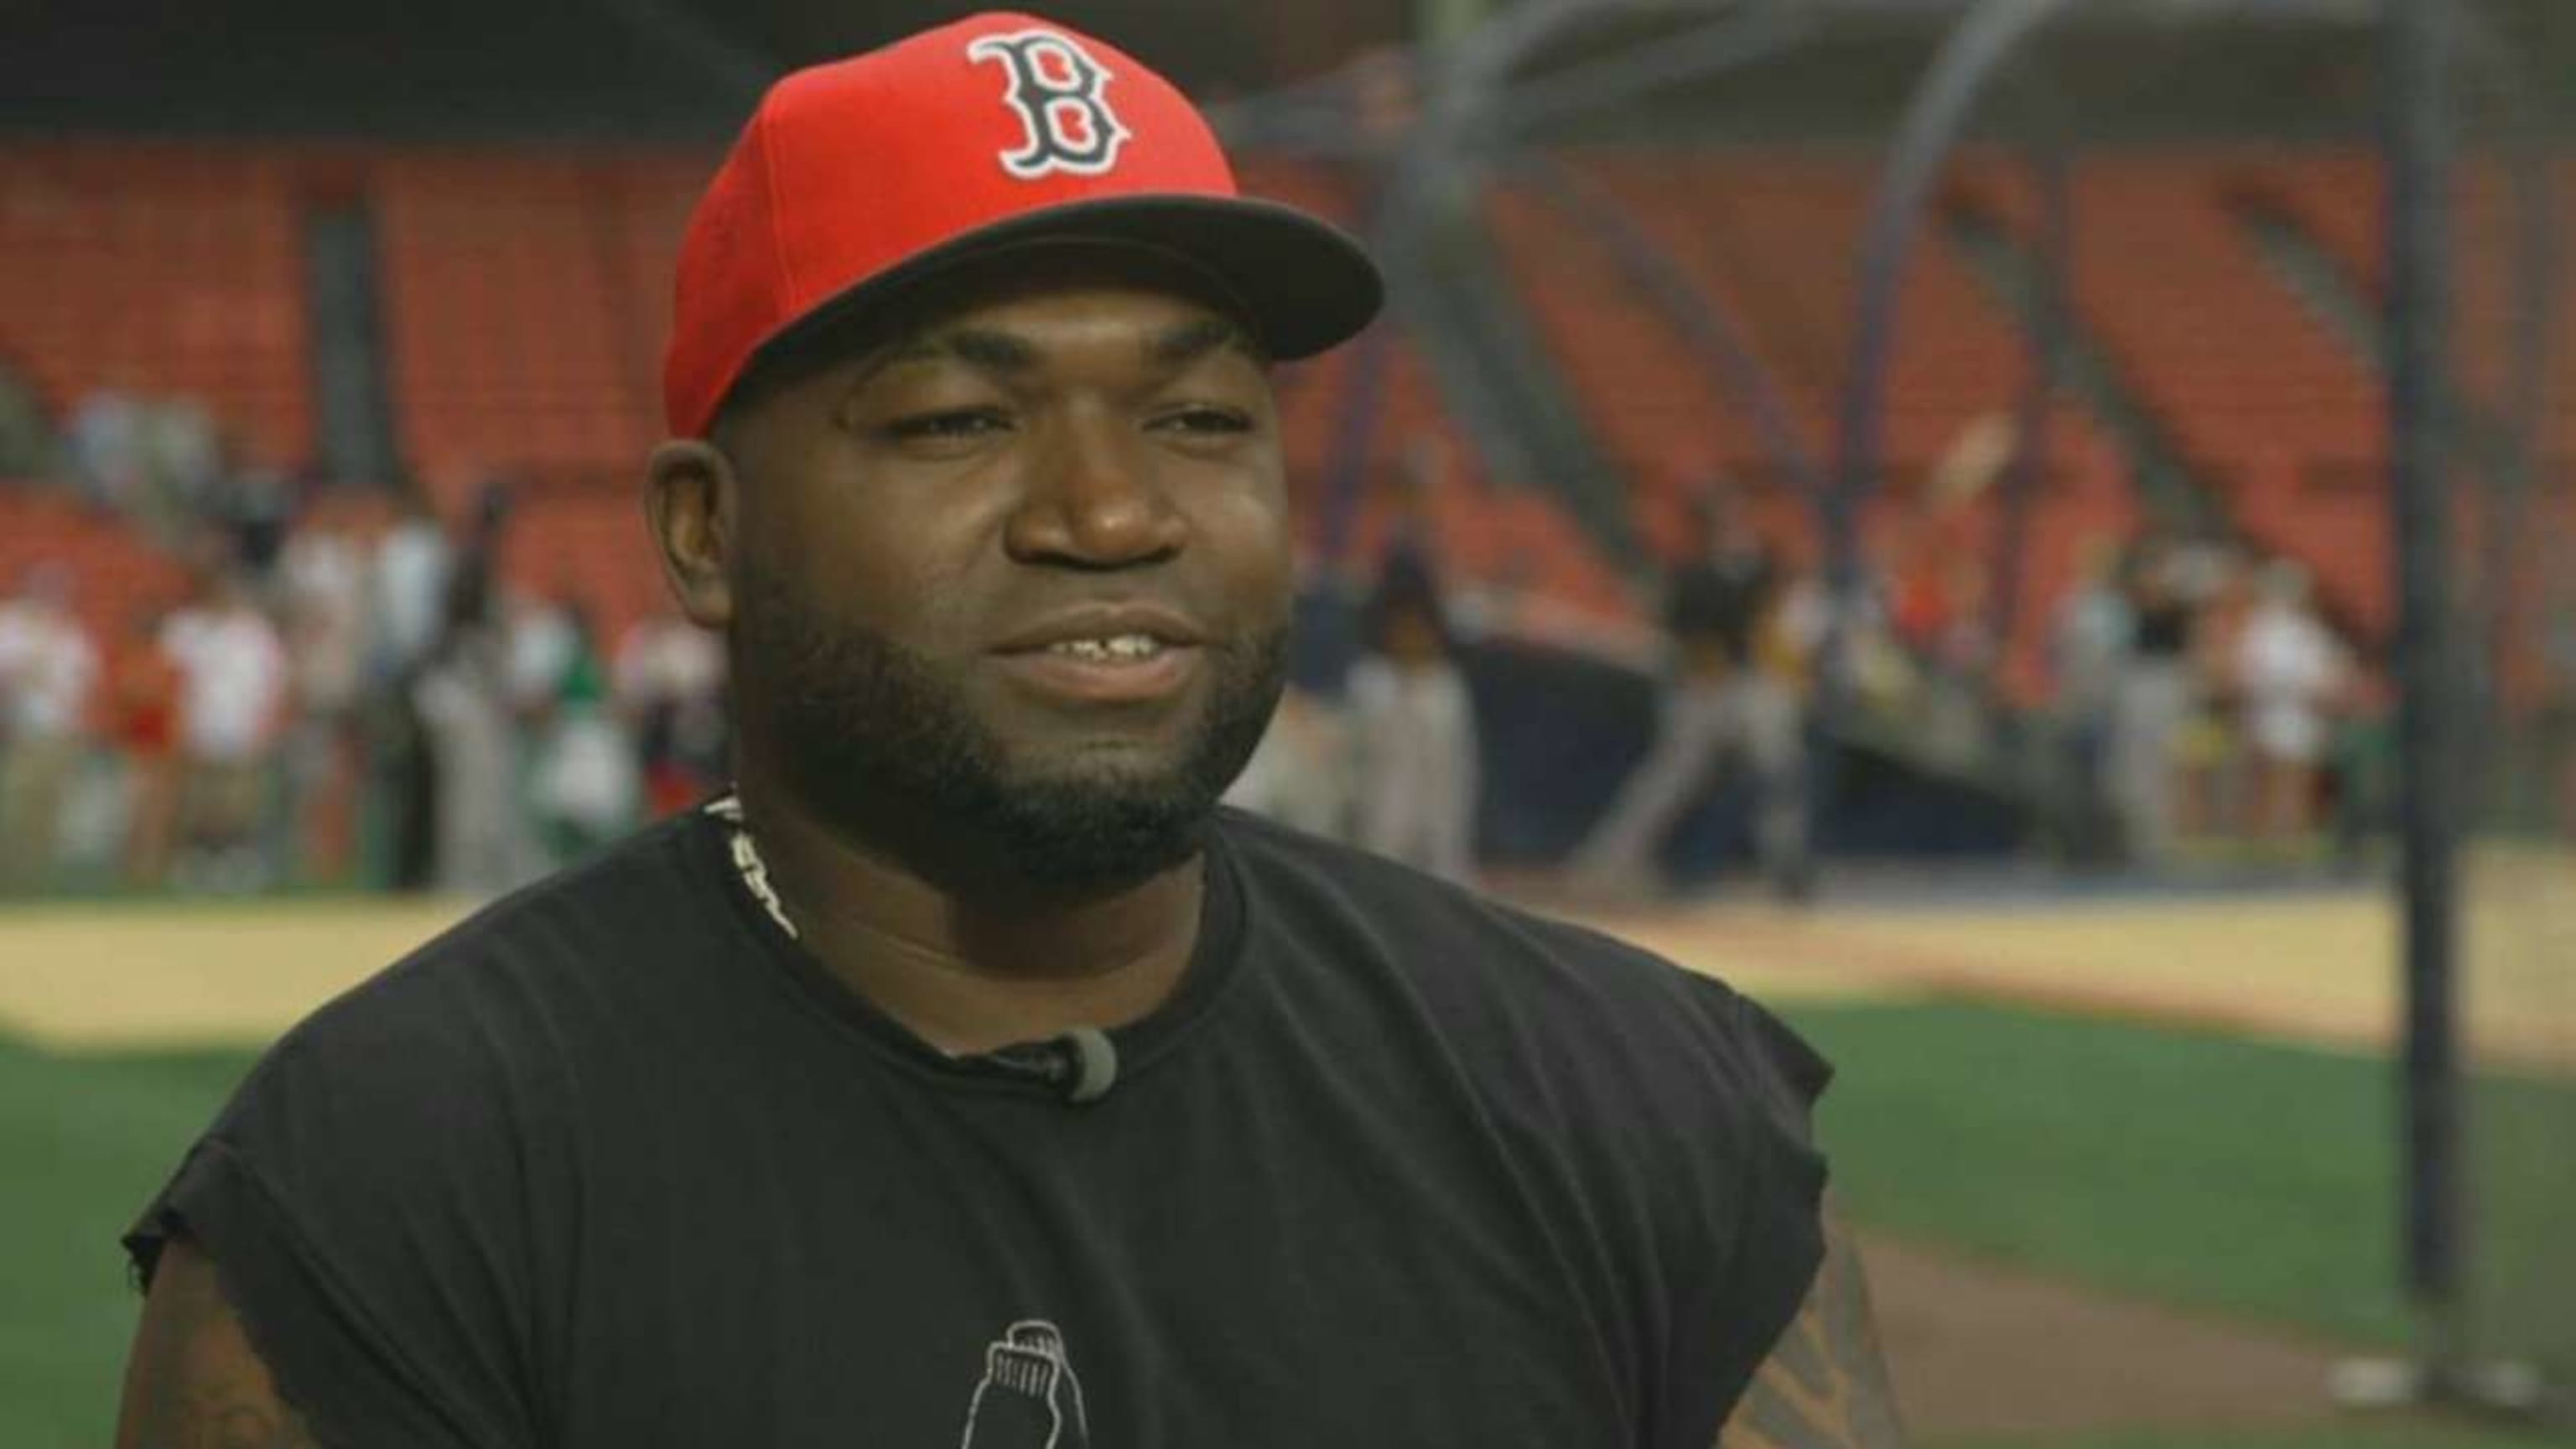 THIS DAY IN BÉISBOL April 24: David Ortiz jersey buried in Yankee Stadium  is latest bizarre chapter in Bosox-Bomber rivalry - Latino Baseball